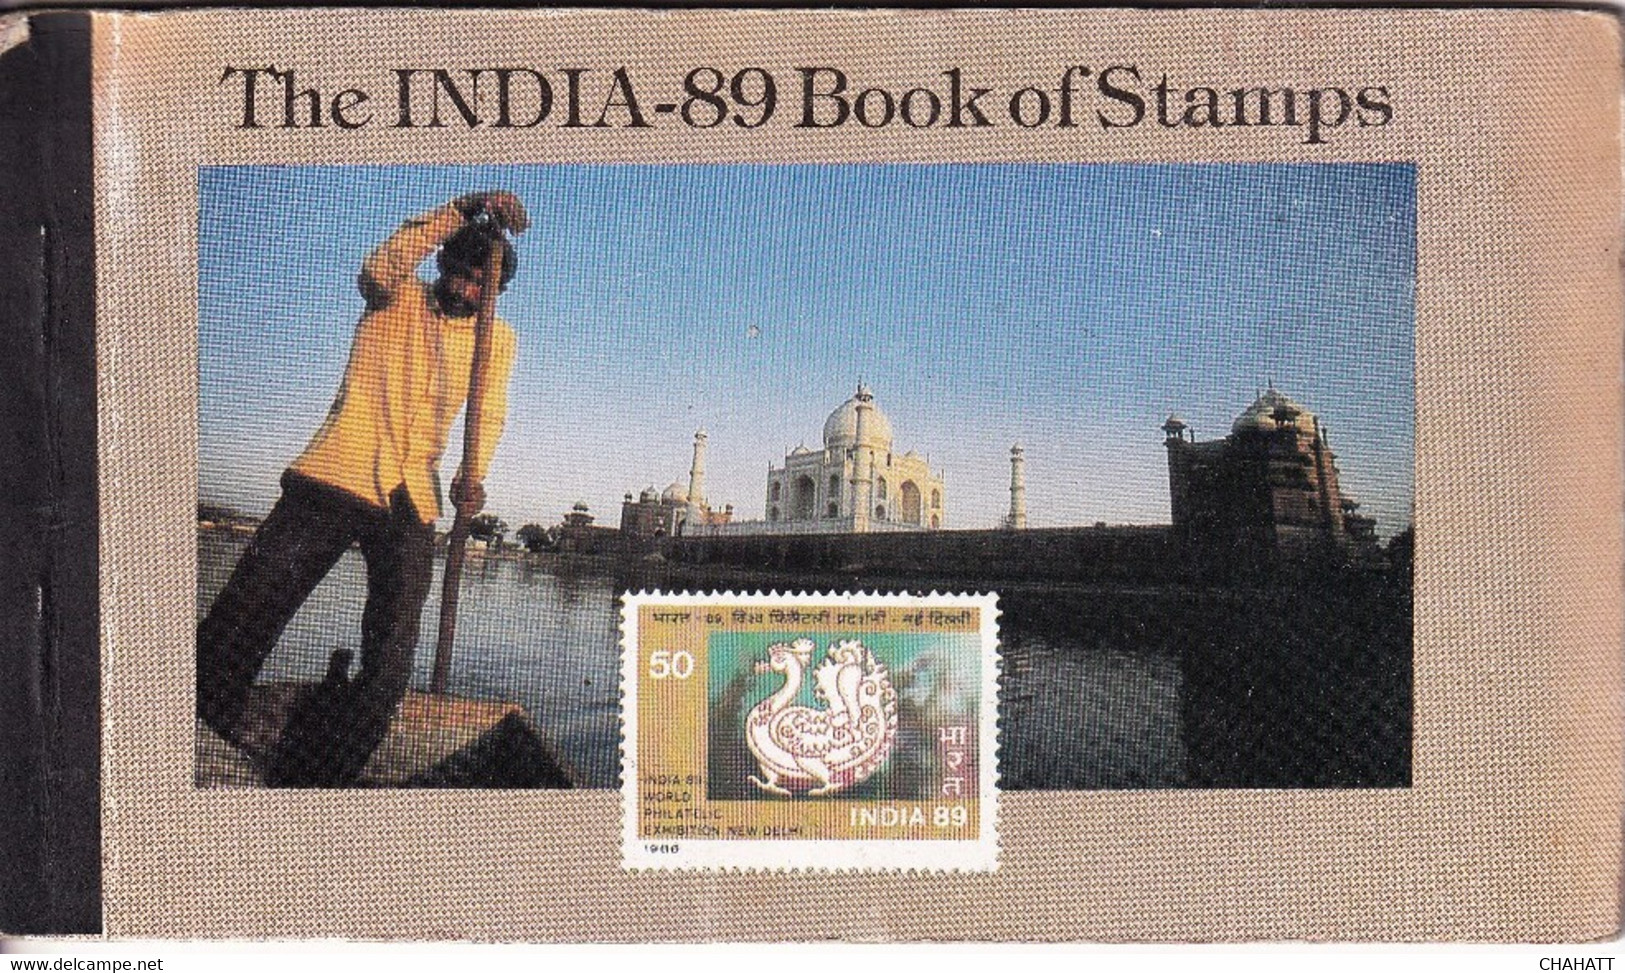 INDIA -89- BOOK OF STAMPS- UNEXPLODED-COMPLETE WITH SHEETLETS- REPRINTED STAMPS-MNH-SCARCE-BX2-38 - Verzamelingen & Reeksen